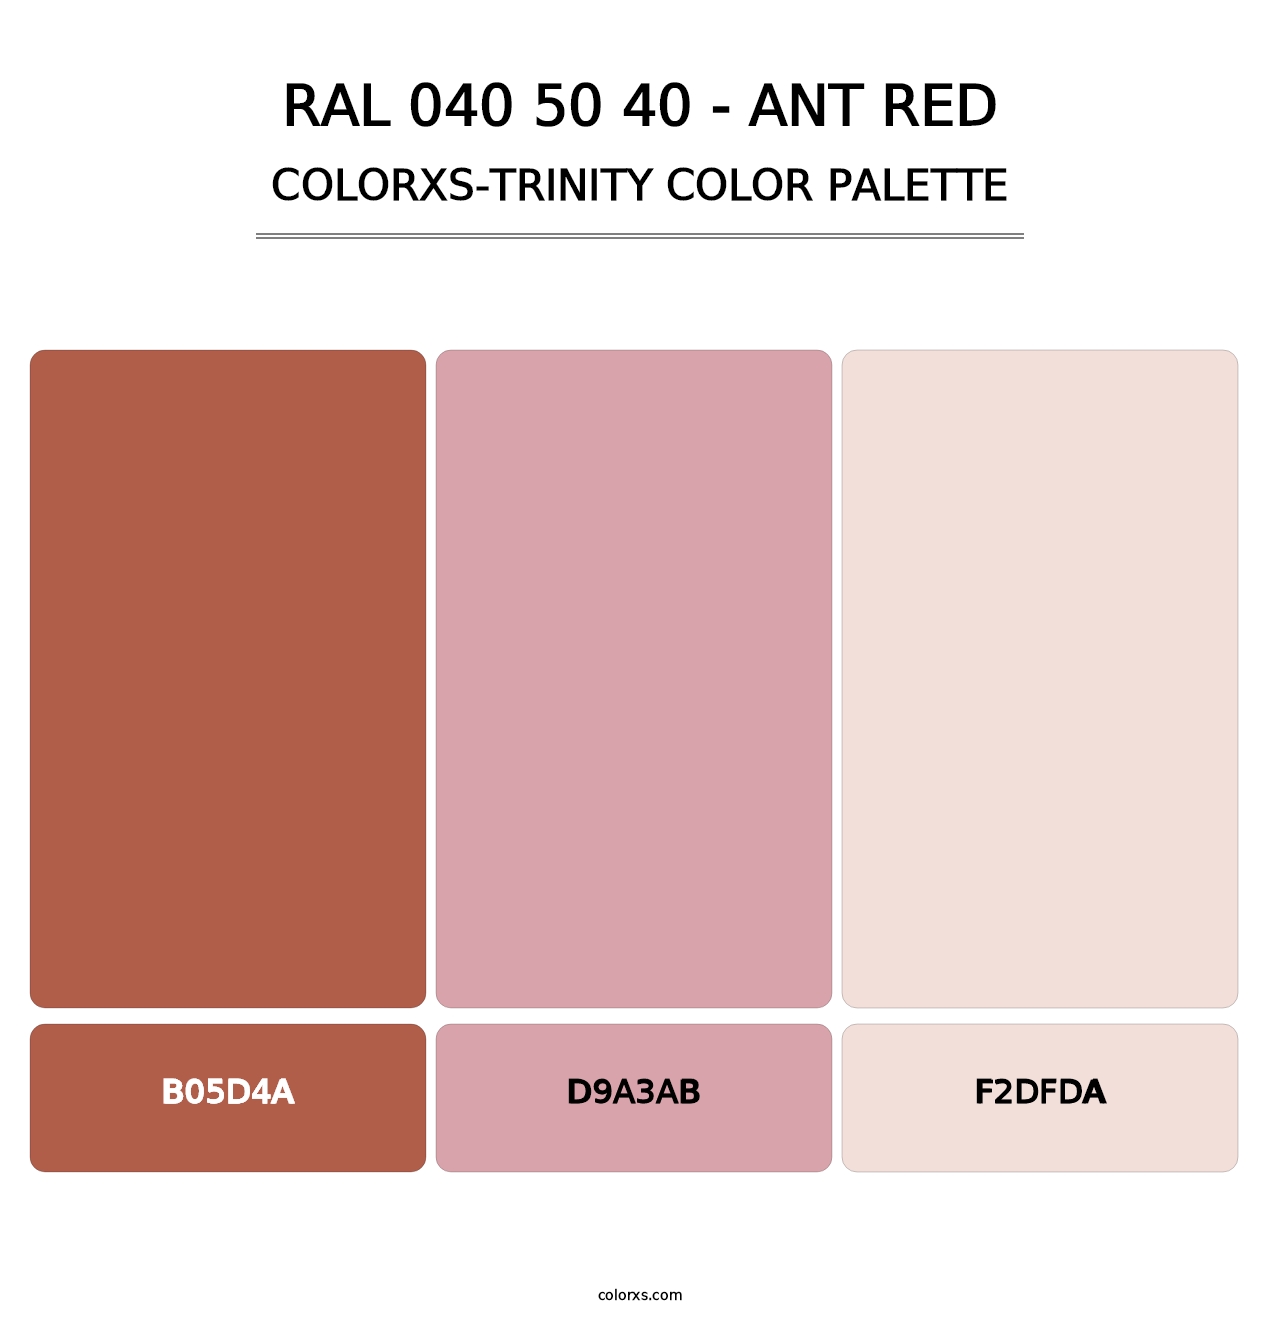 RAL 040 50 40 - Ant Red - Colorxs Trinity Palette